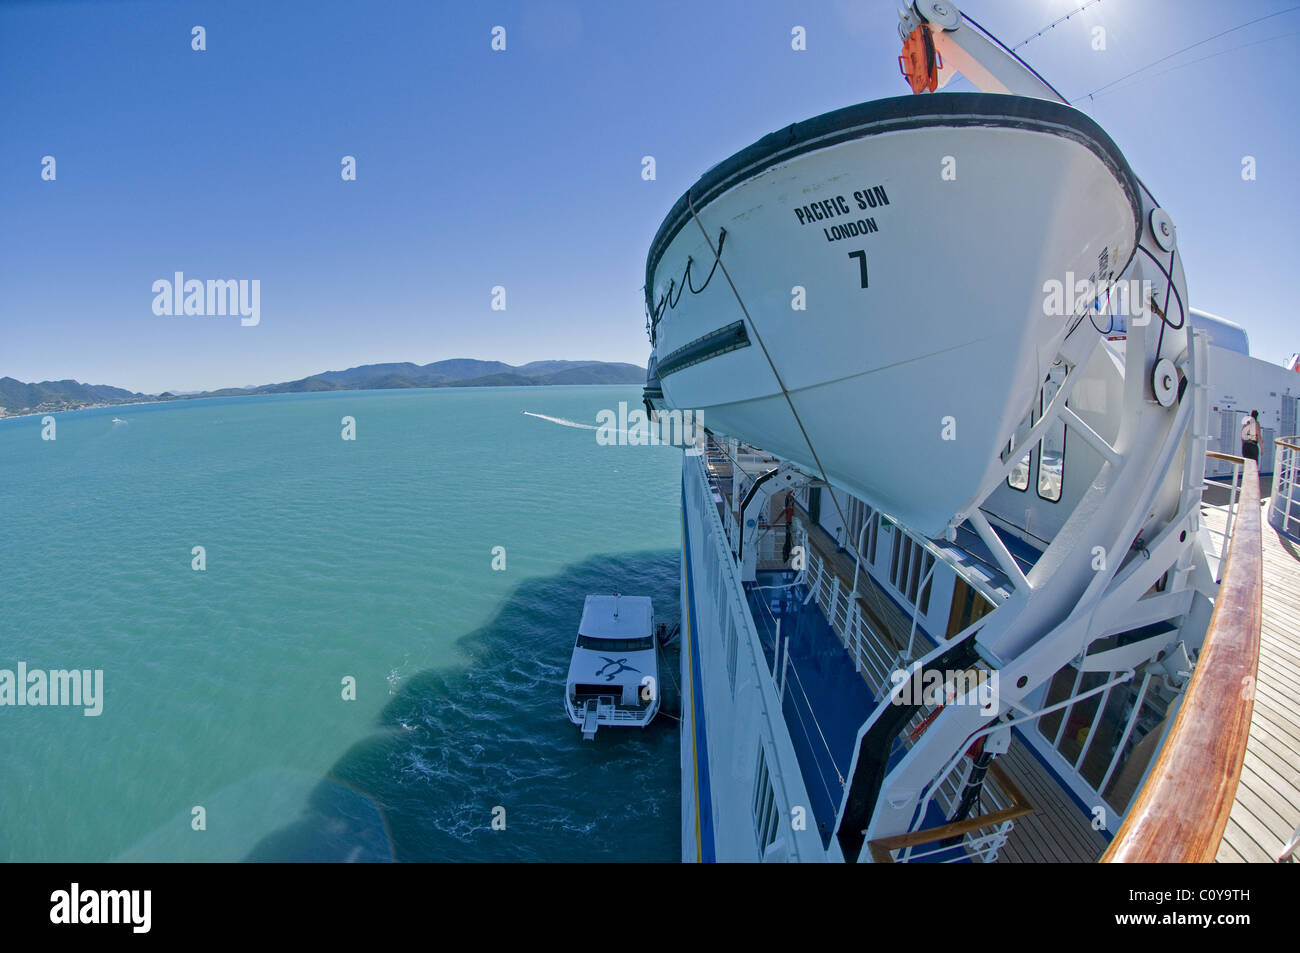 View of lifeboat on the cruise ship 'Pacific Sun' docked in the Whitsunday Islands, Queensland, Australia. The Whitsundays in the Great Barrier Reef Stock Photo